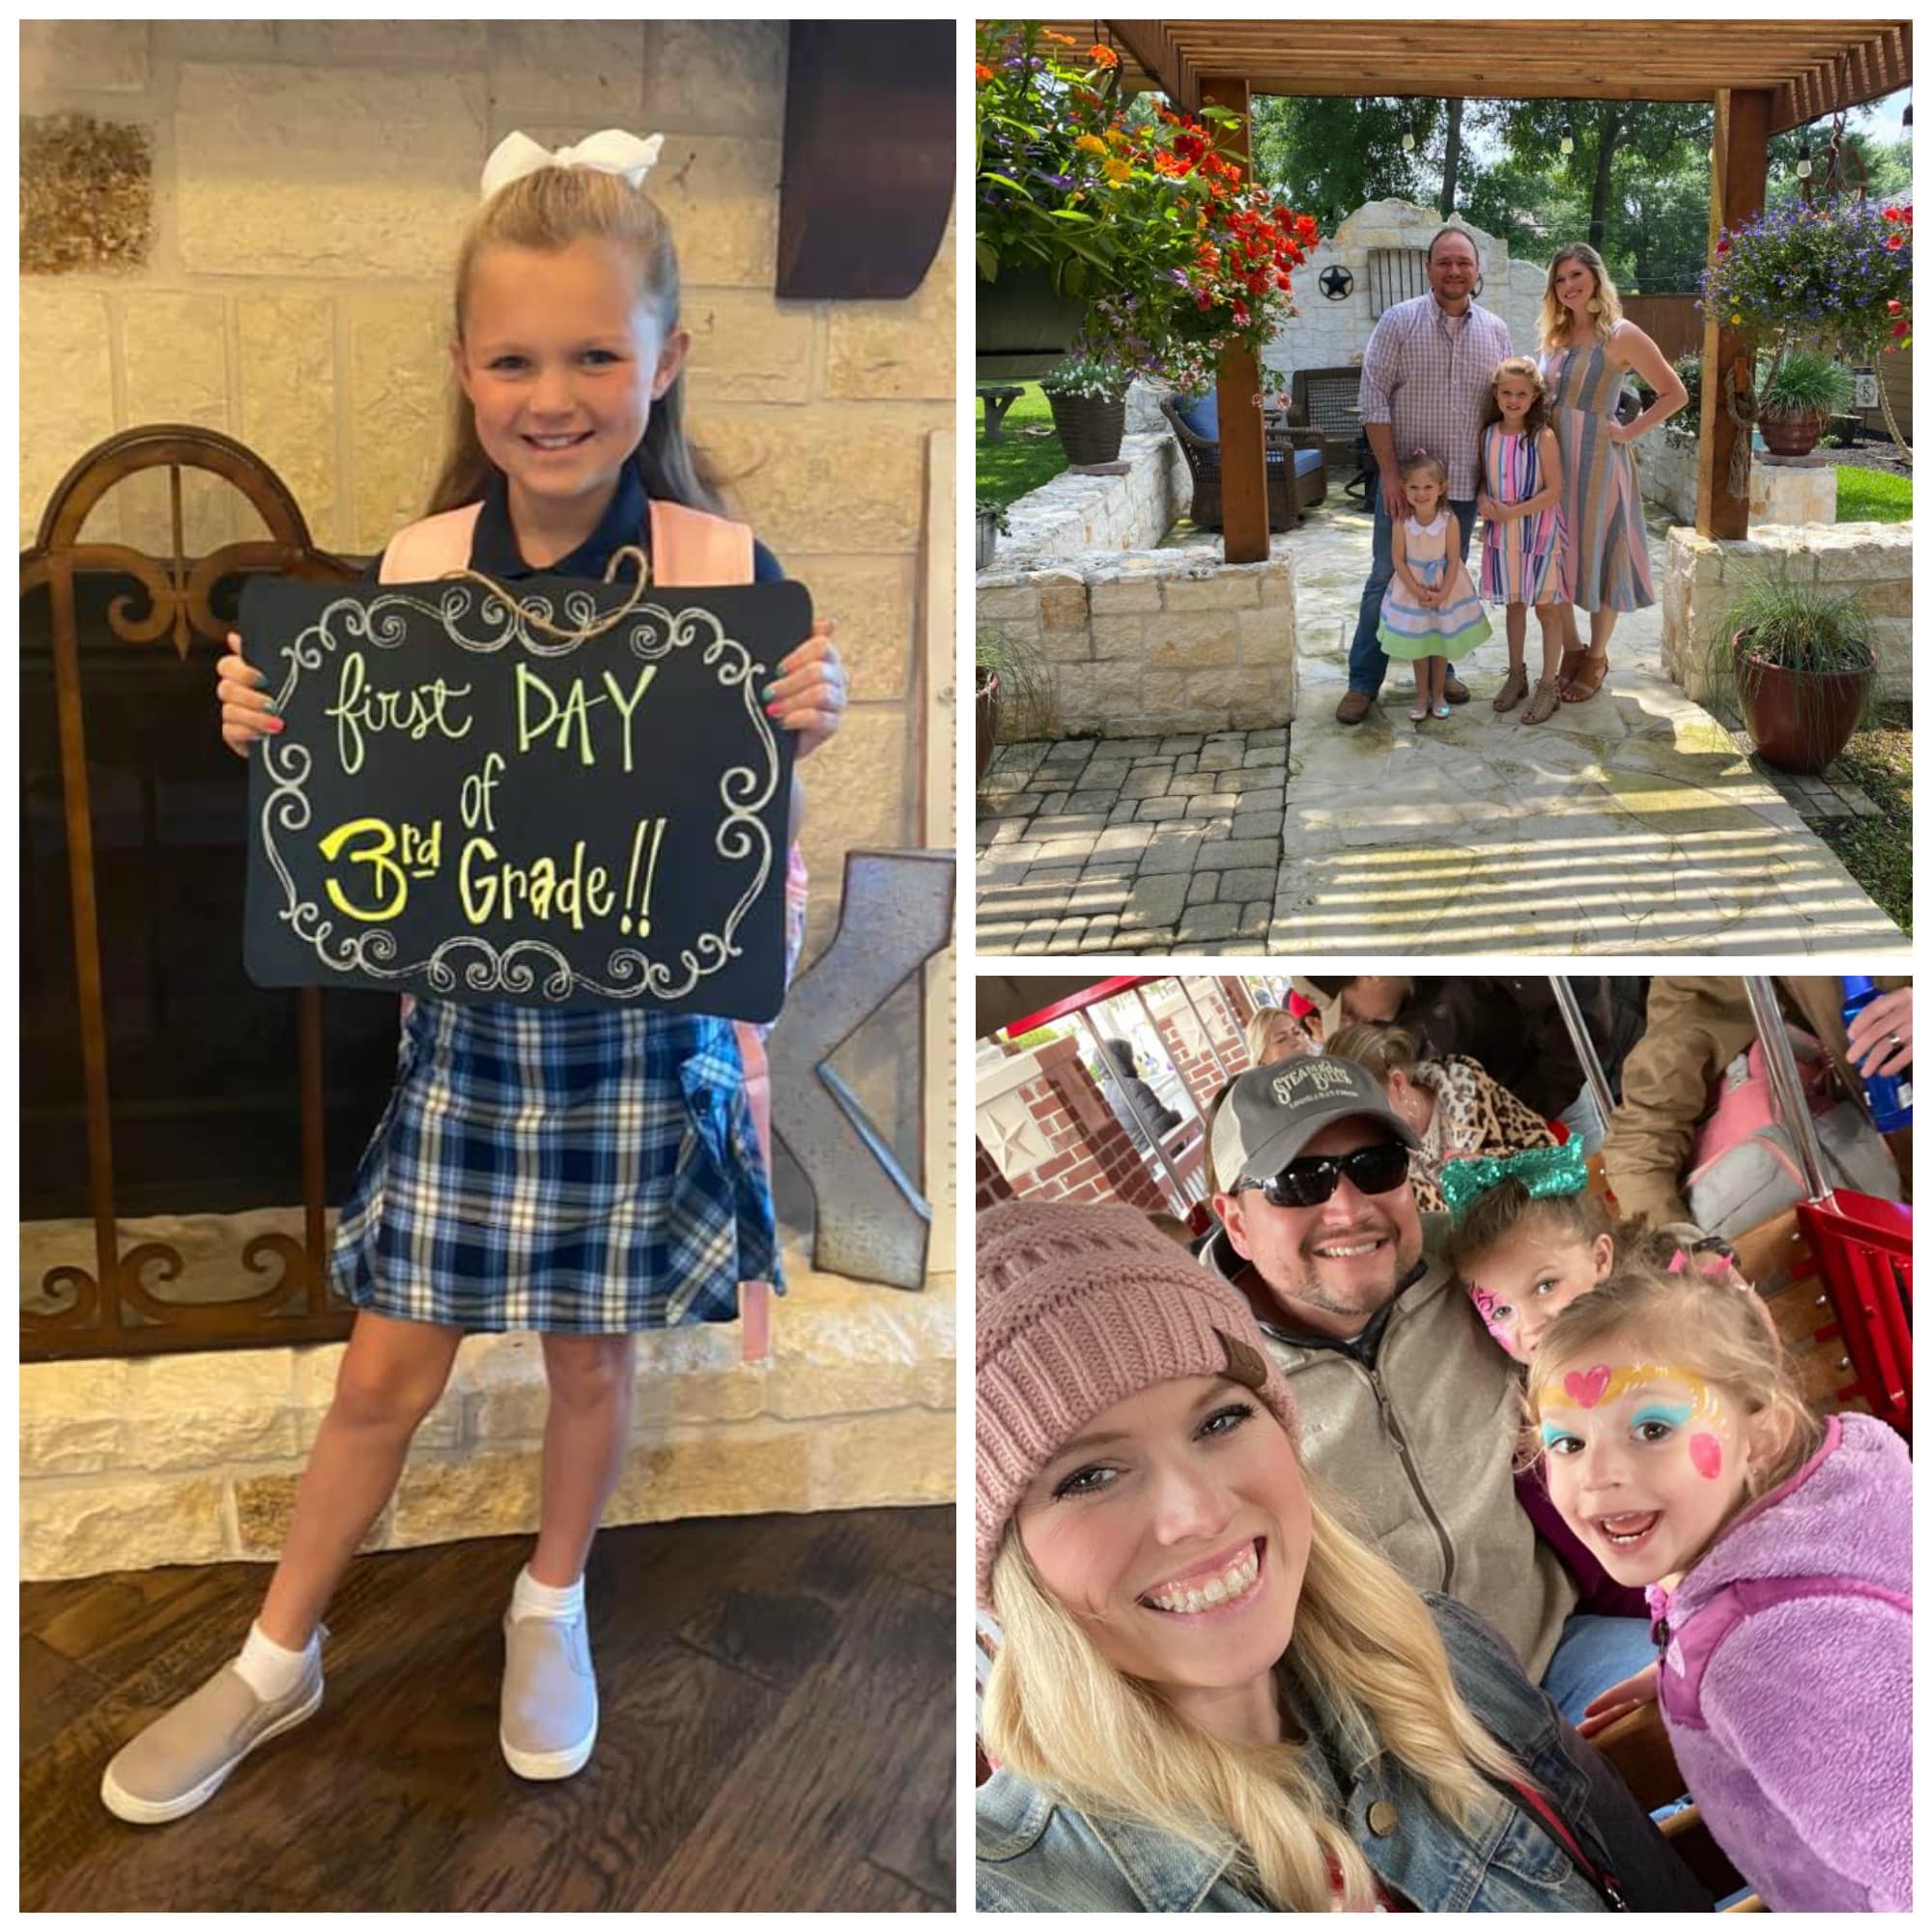 “There is a new Warrior in town,” says alumnus Justin Kirtley ('04) and his wife/former CCS teacher, Natalie Kirtley. Their daughter Carlee Kirtley started third grade at Cypress Christian School this year, and they are so excited!